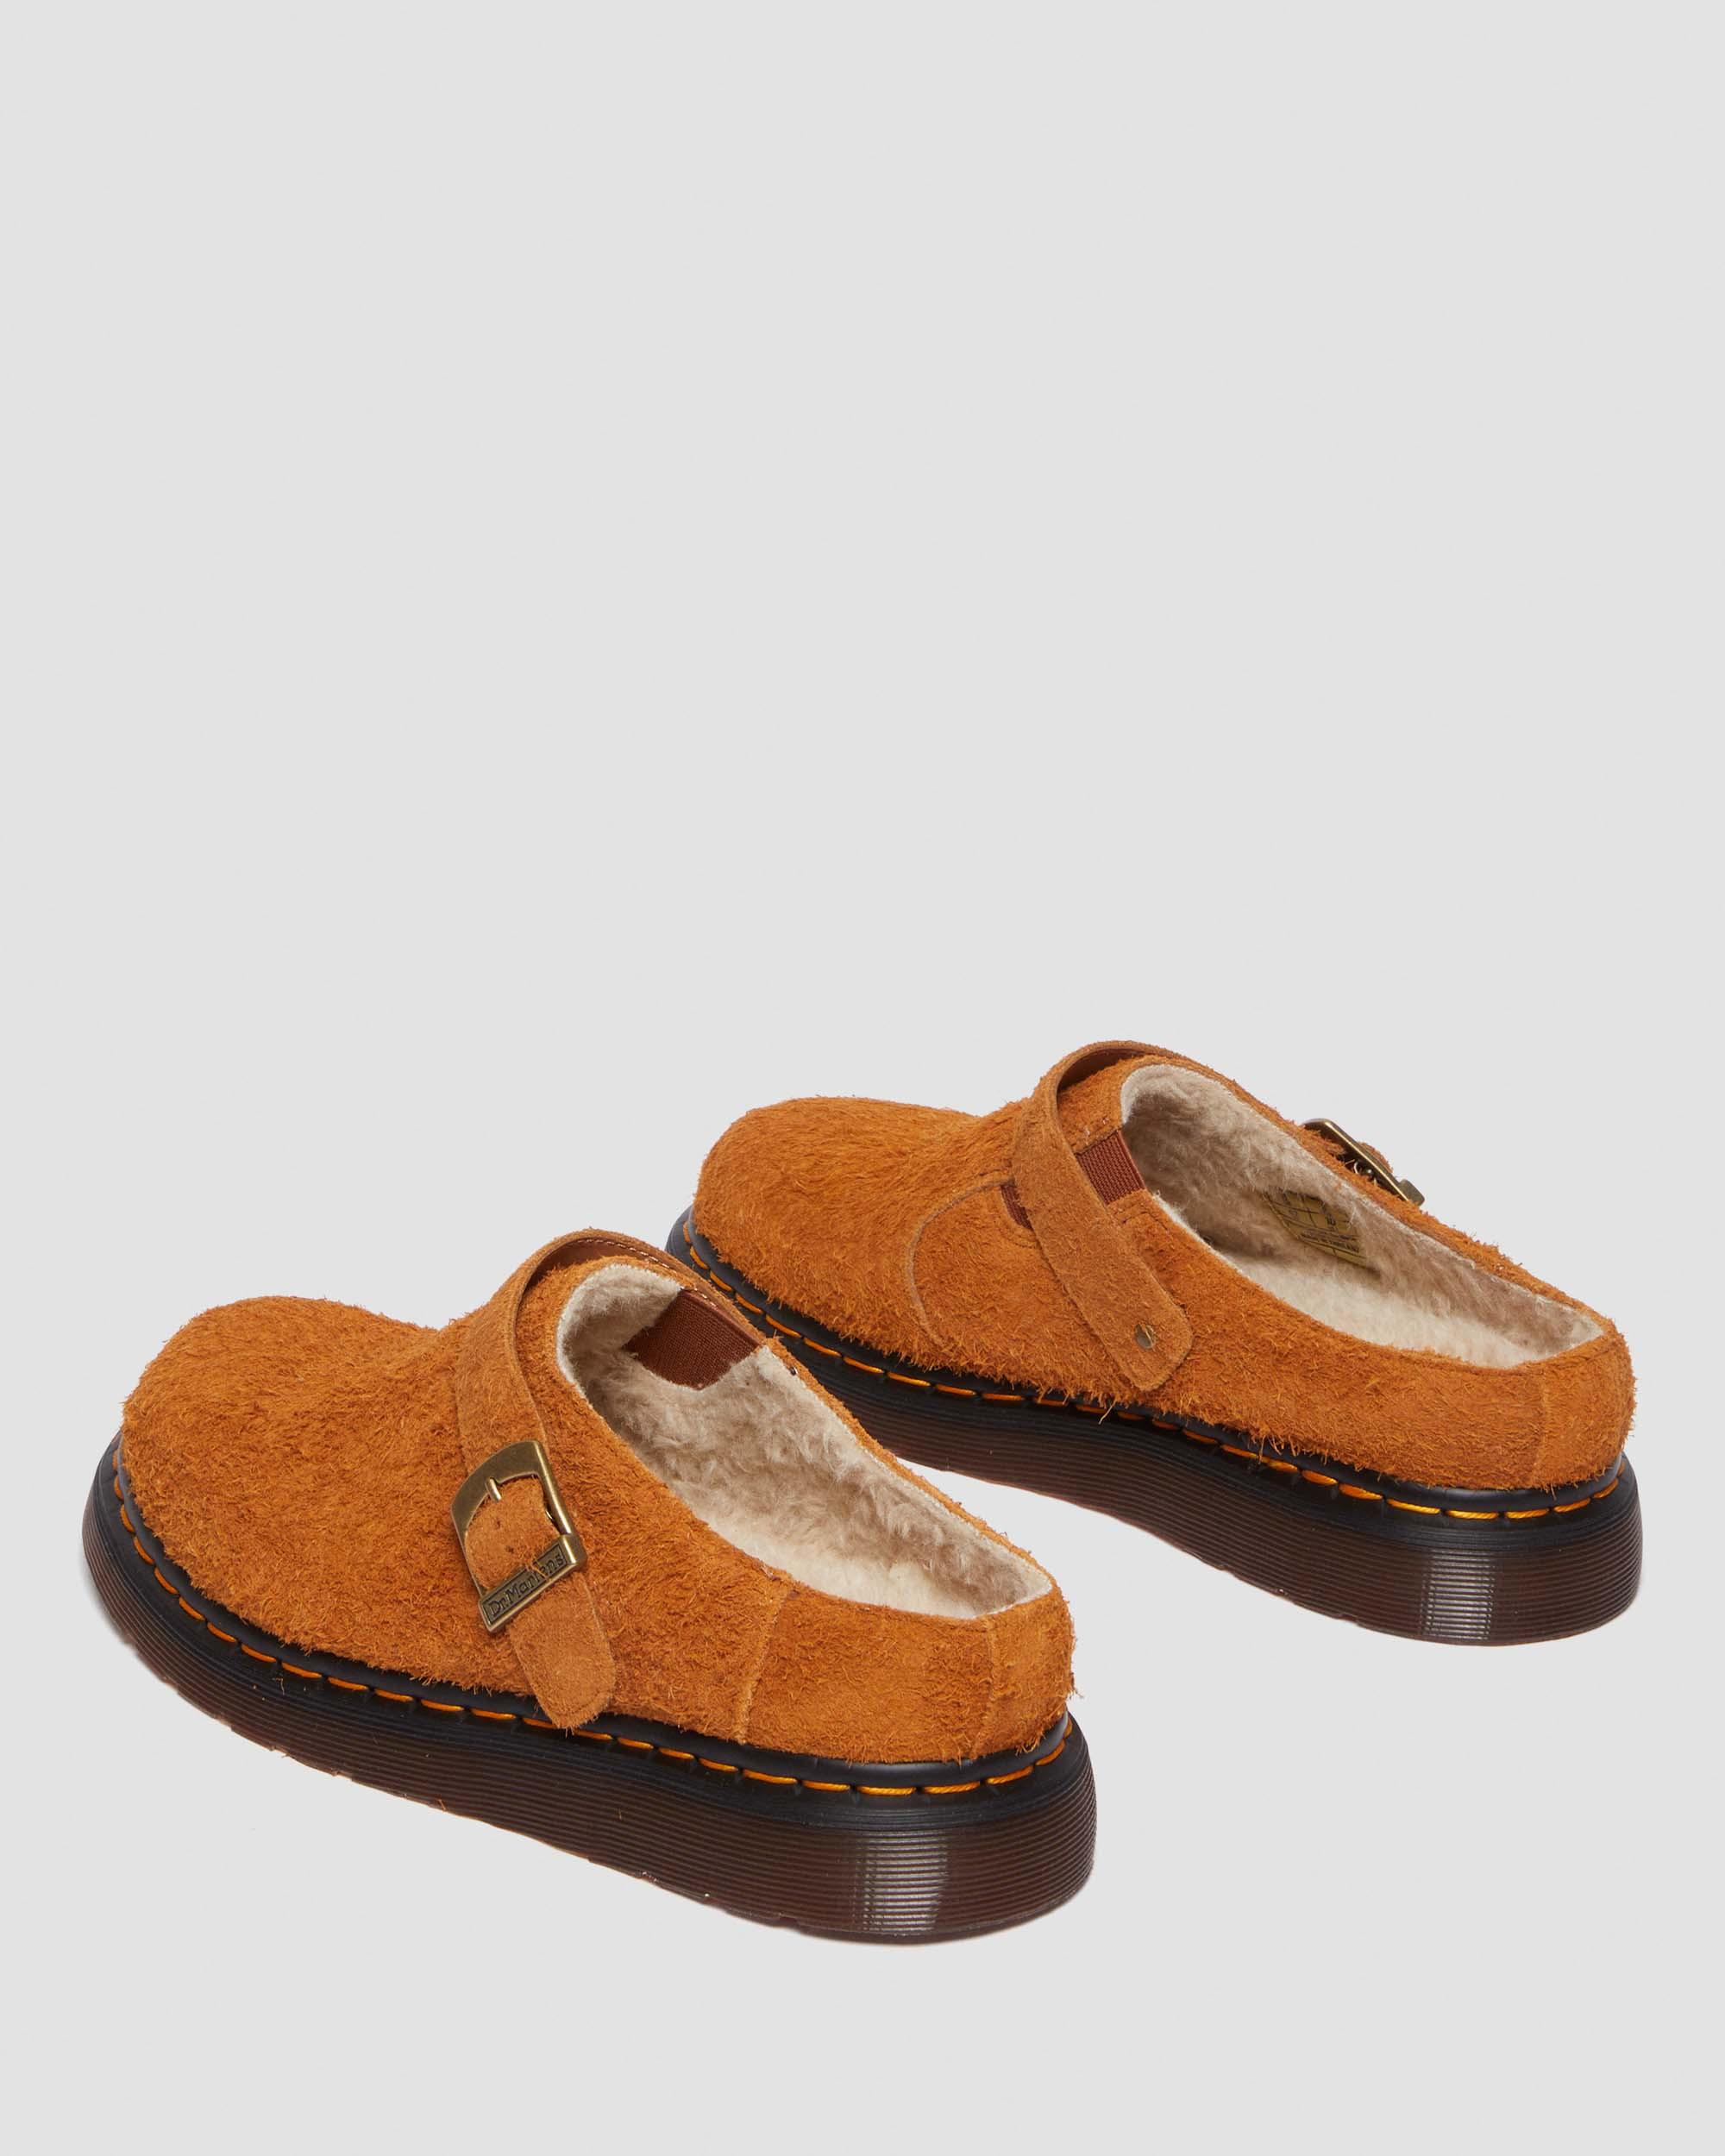 Isham Faux Shearling Lined Suede Slingback Mules in PECAN BROWN